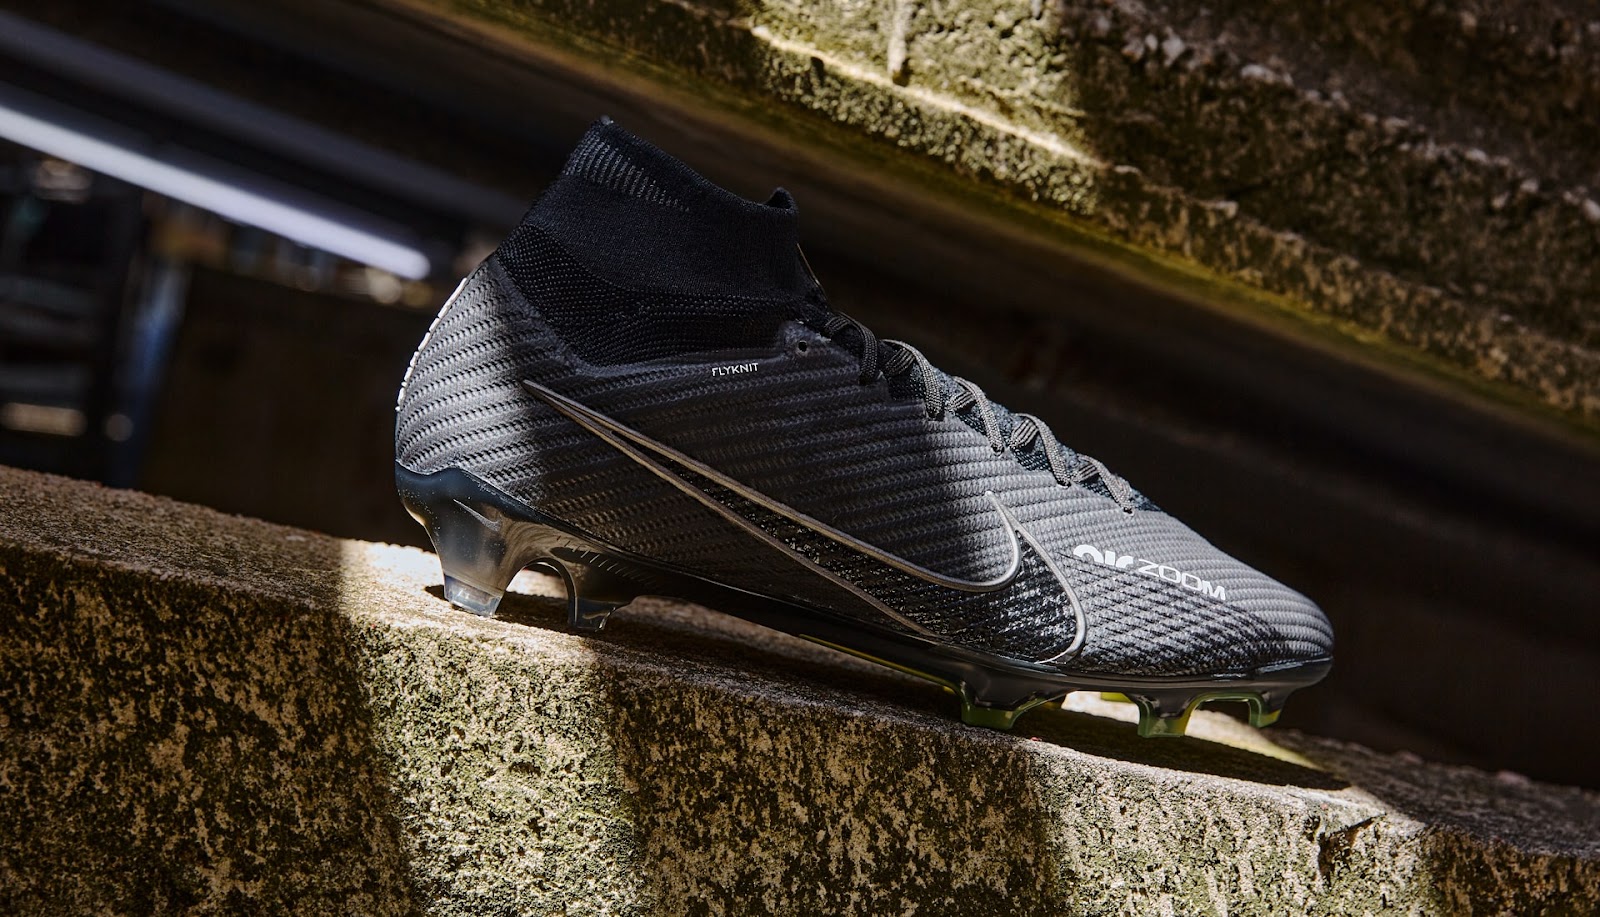 Nike launches the 'Pitch Dark' pack